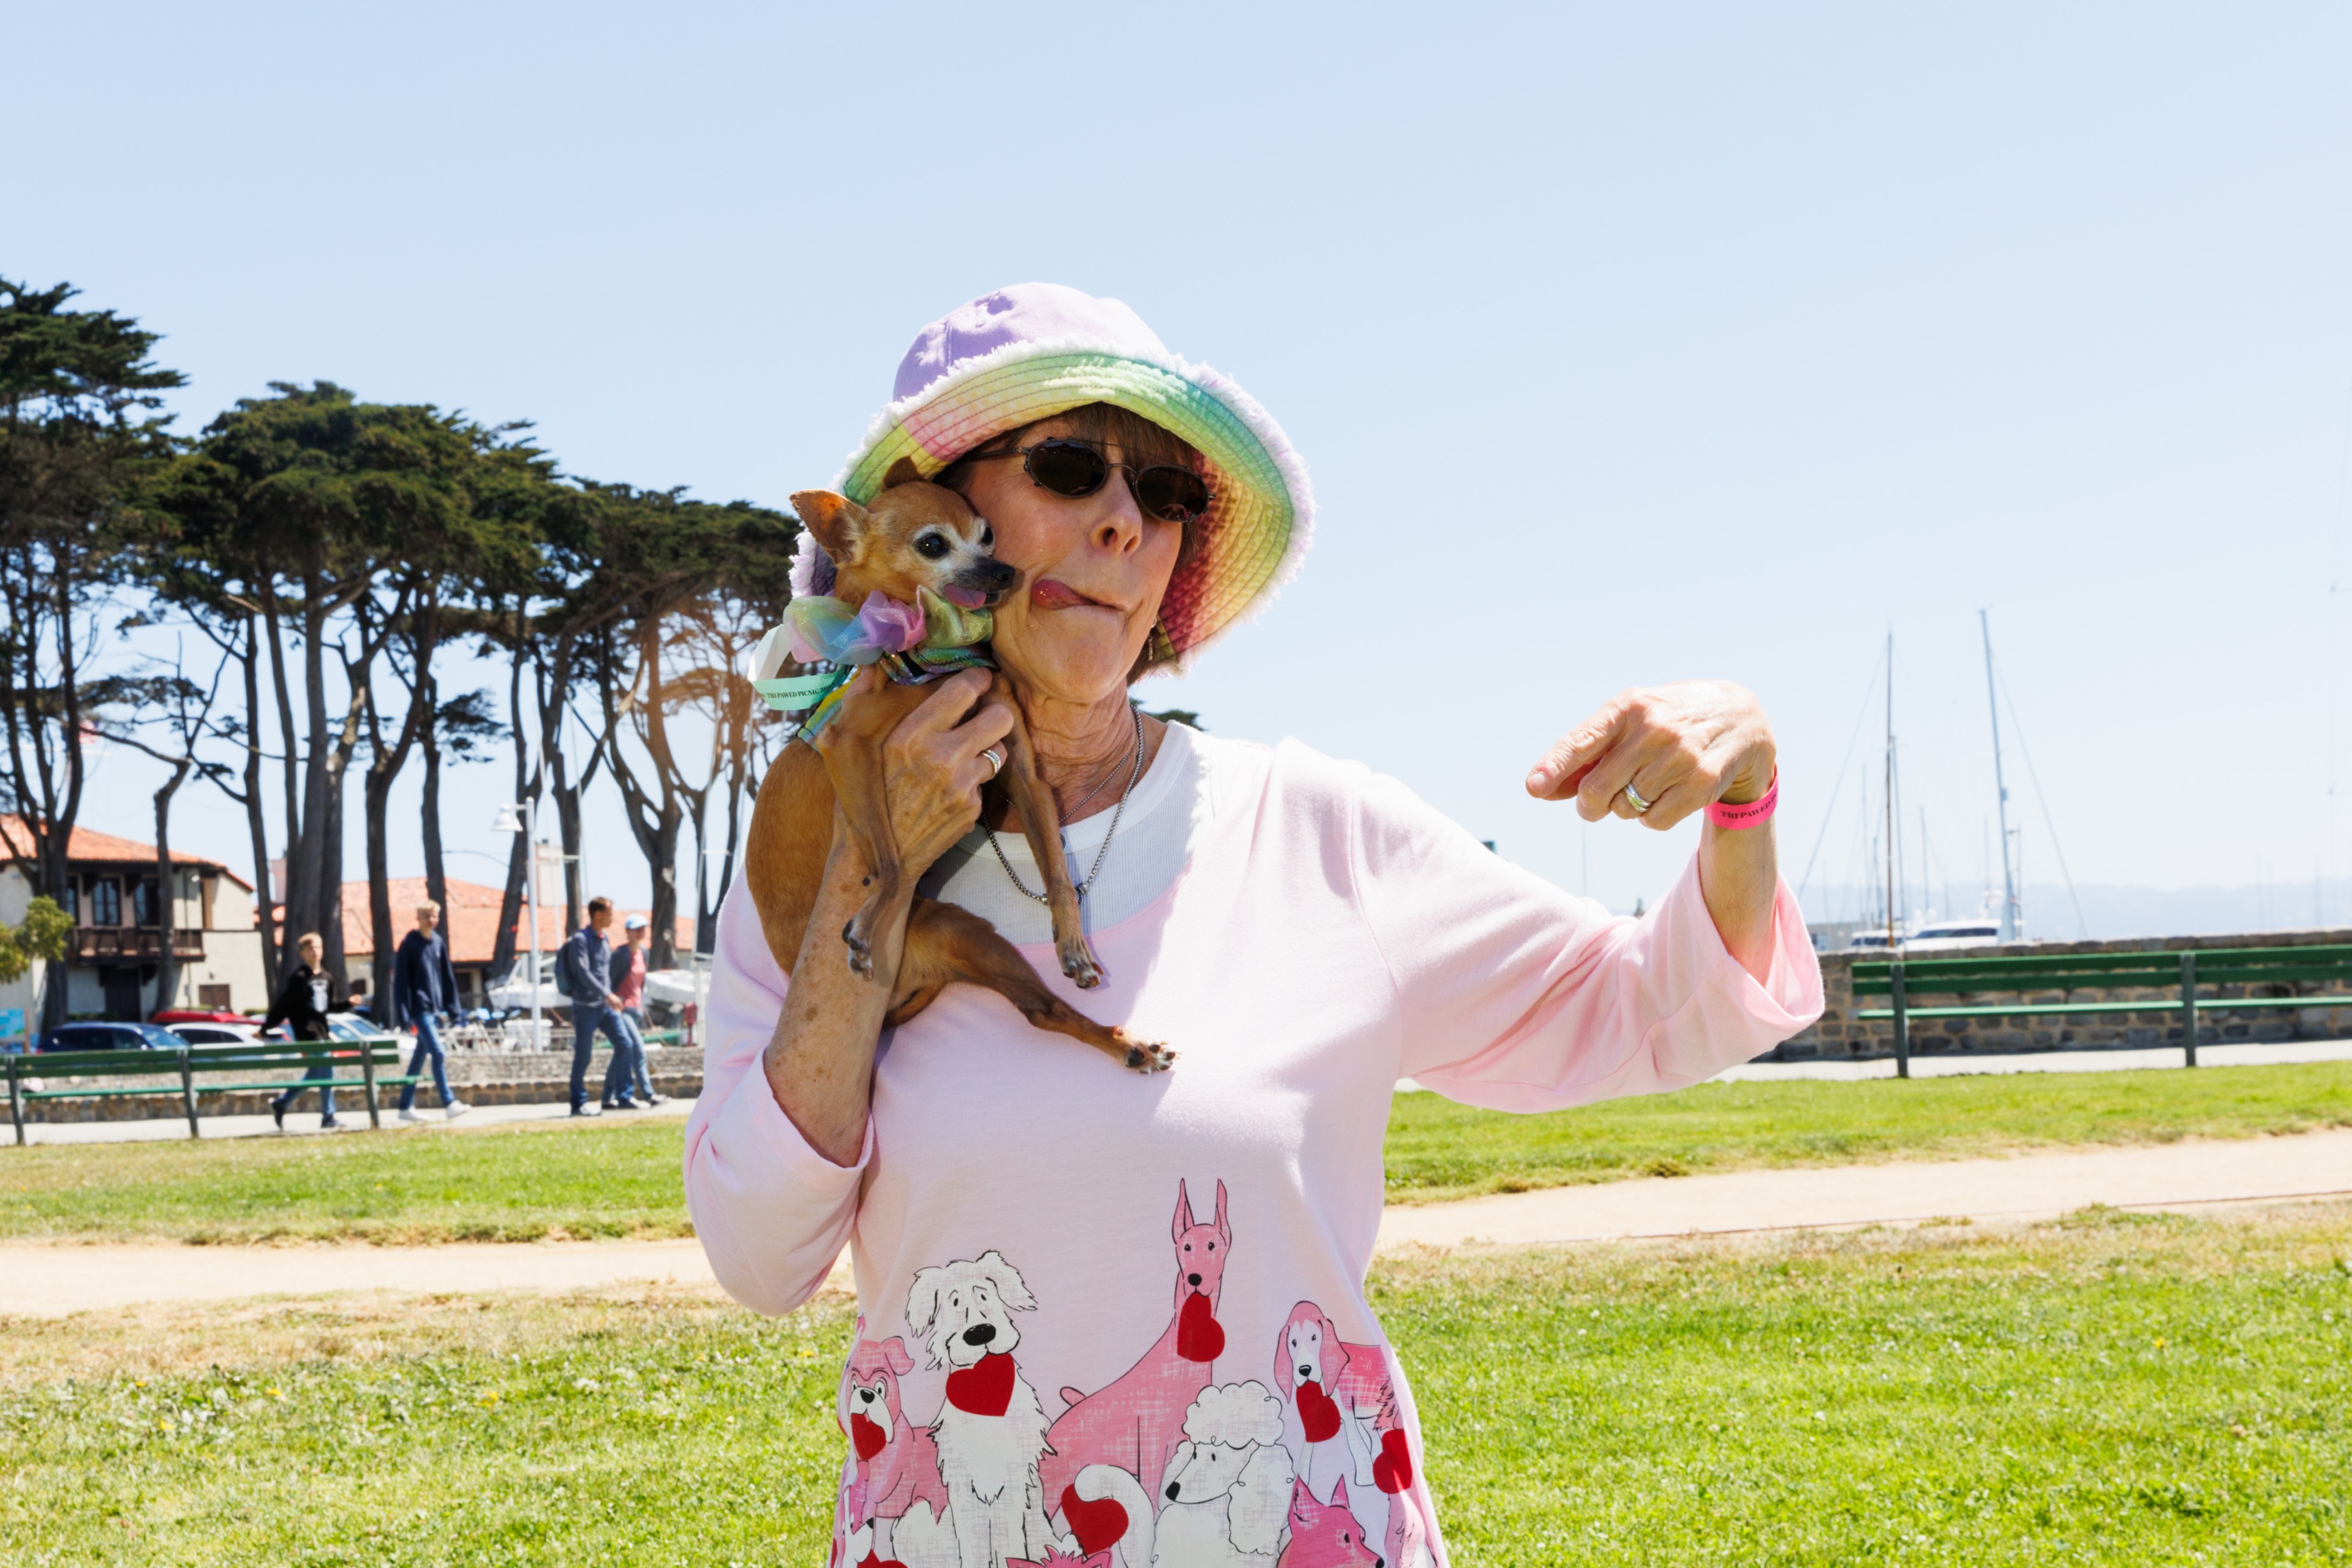 A woman in a colorful hat and dog-themed shirt holds a Chihuahua on her shoulder in a park, pointing playfully, with trees and people in the background.